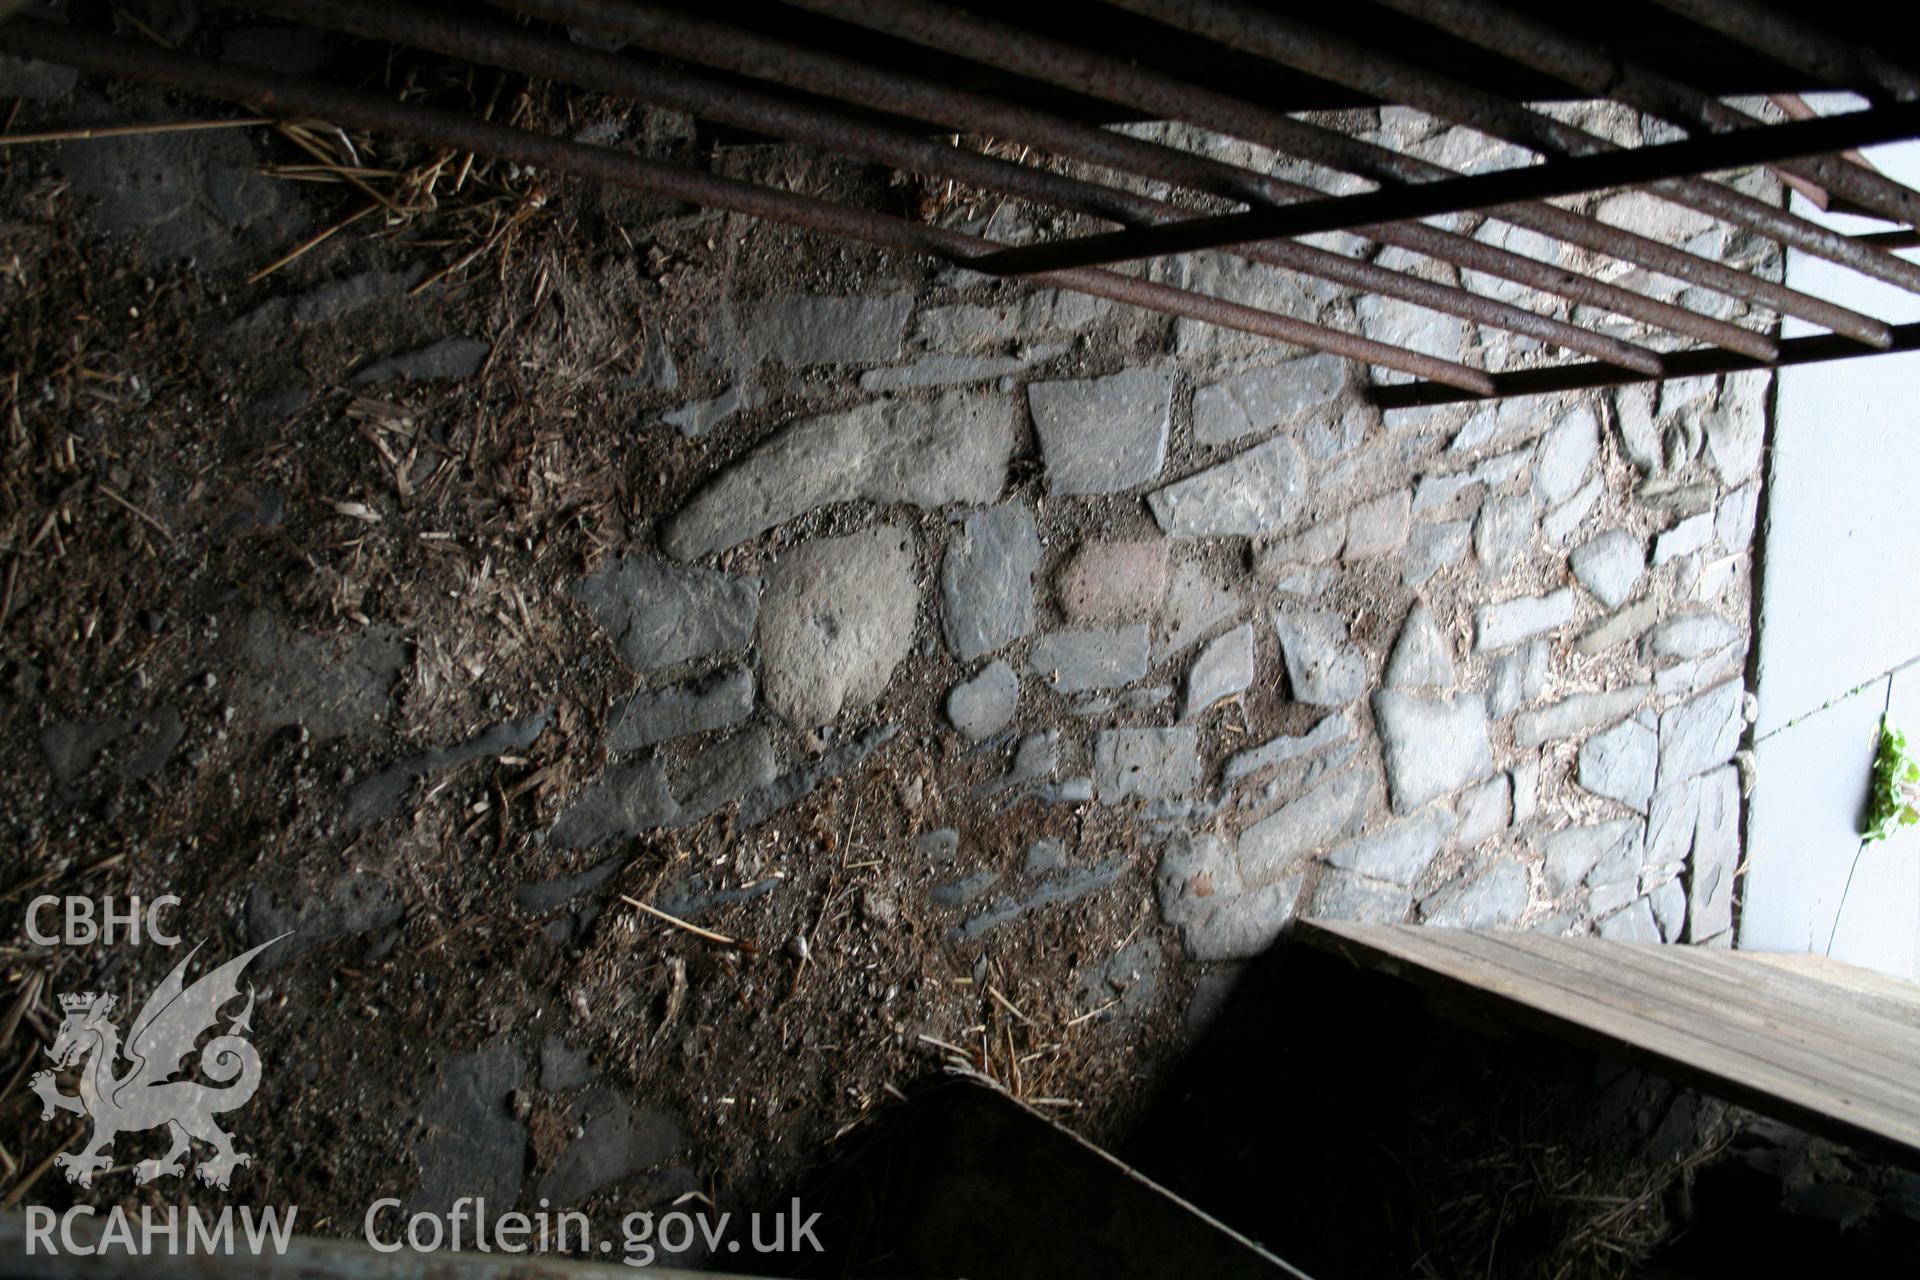 Interior view of cobblestone floor. Photographic survey of the northern range of cattle-shelters at Tan-y-Graig Farm, Llanfarian, conducted by Geoff Ward and John Wiles, 11th December 2006.